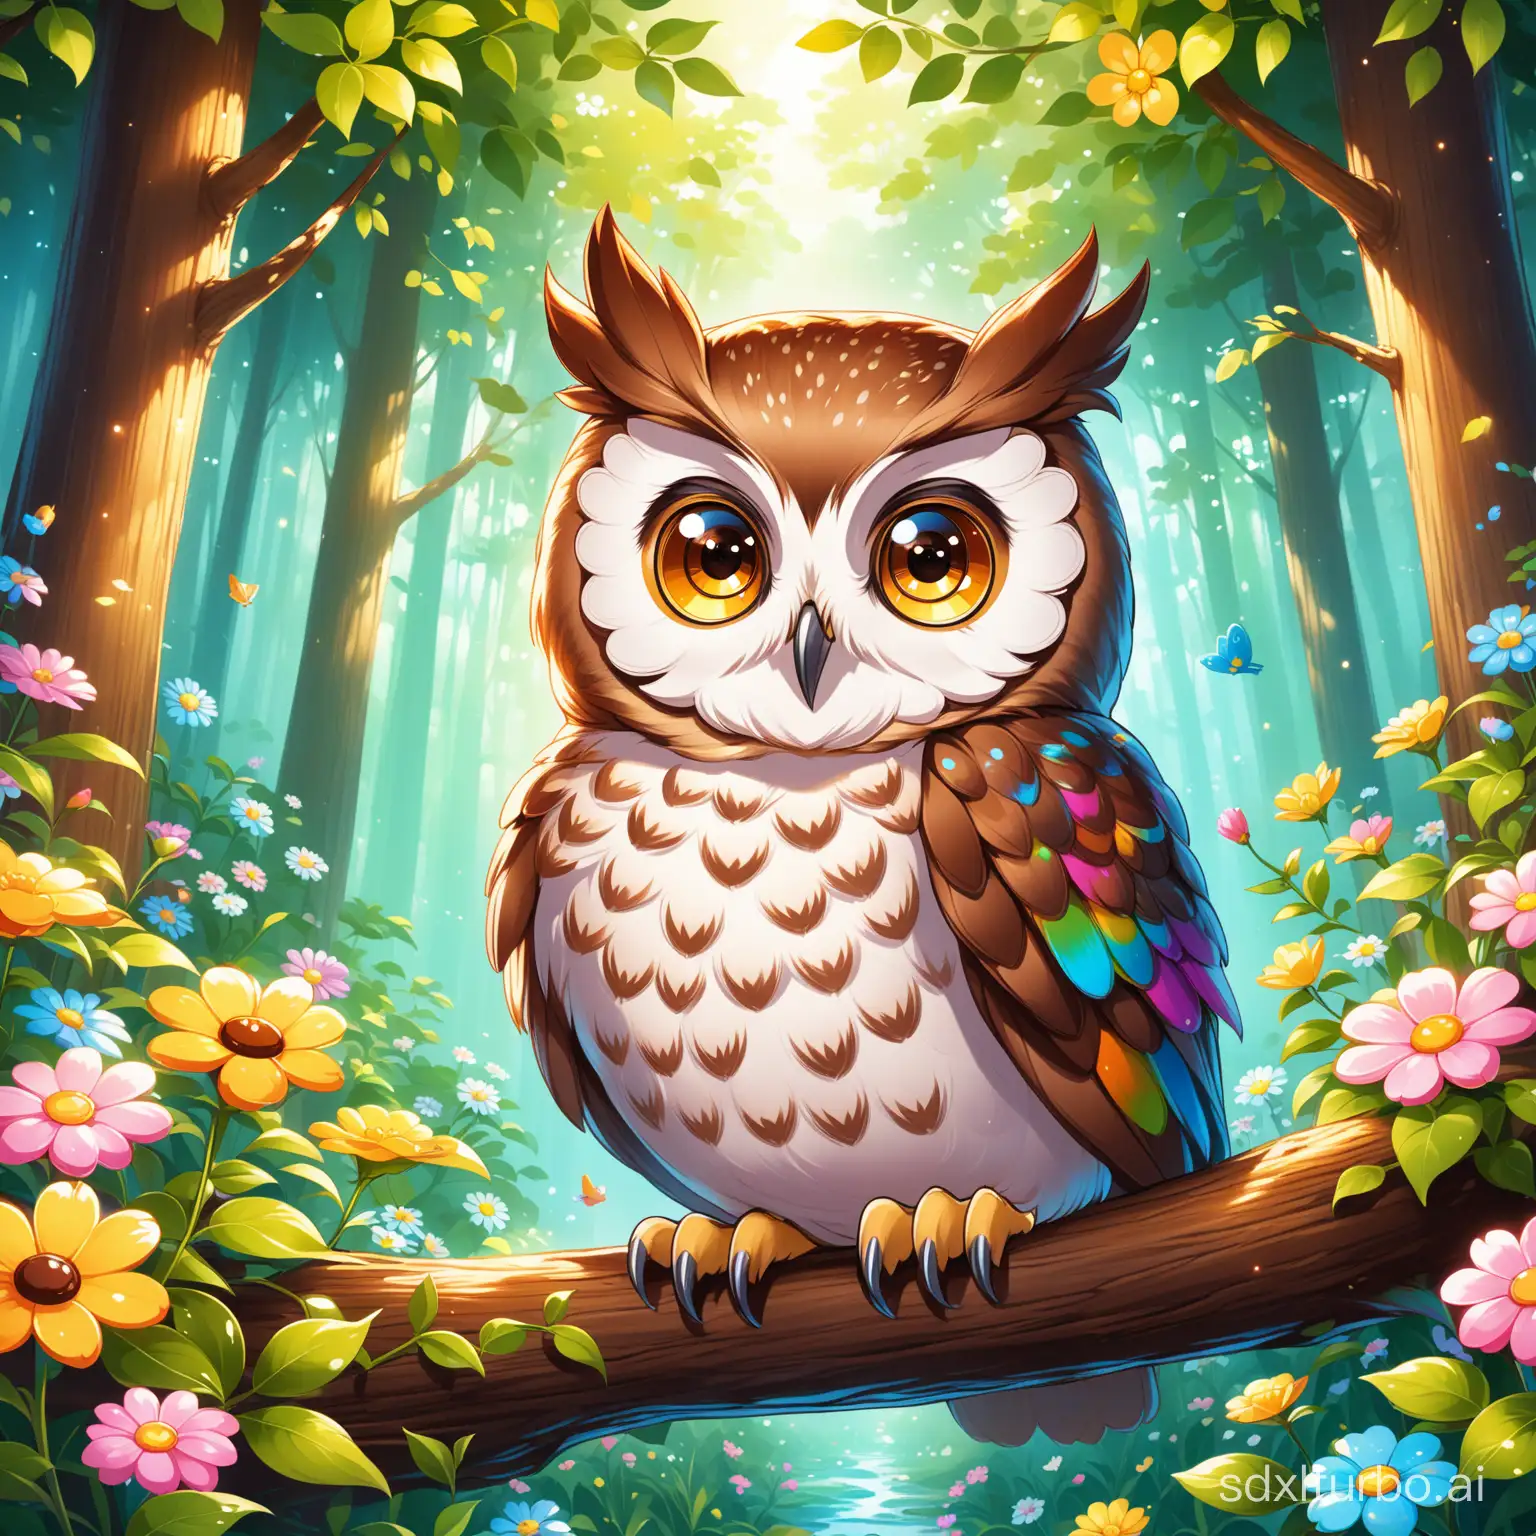 a cartoon owl portrait, flowers around, in forest, children painting, cg, fantasy, painting